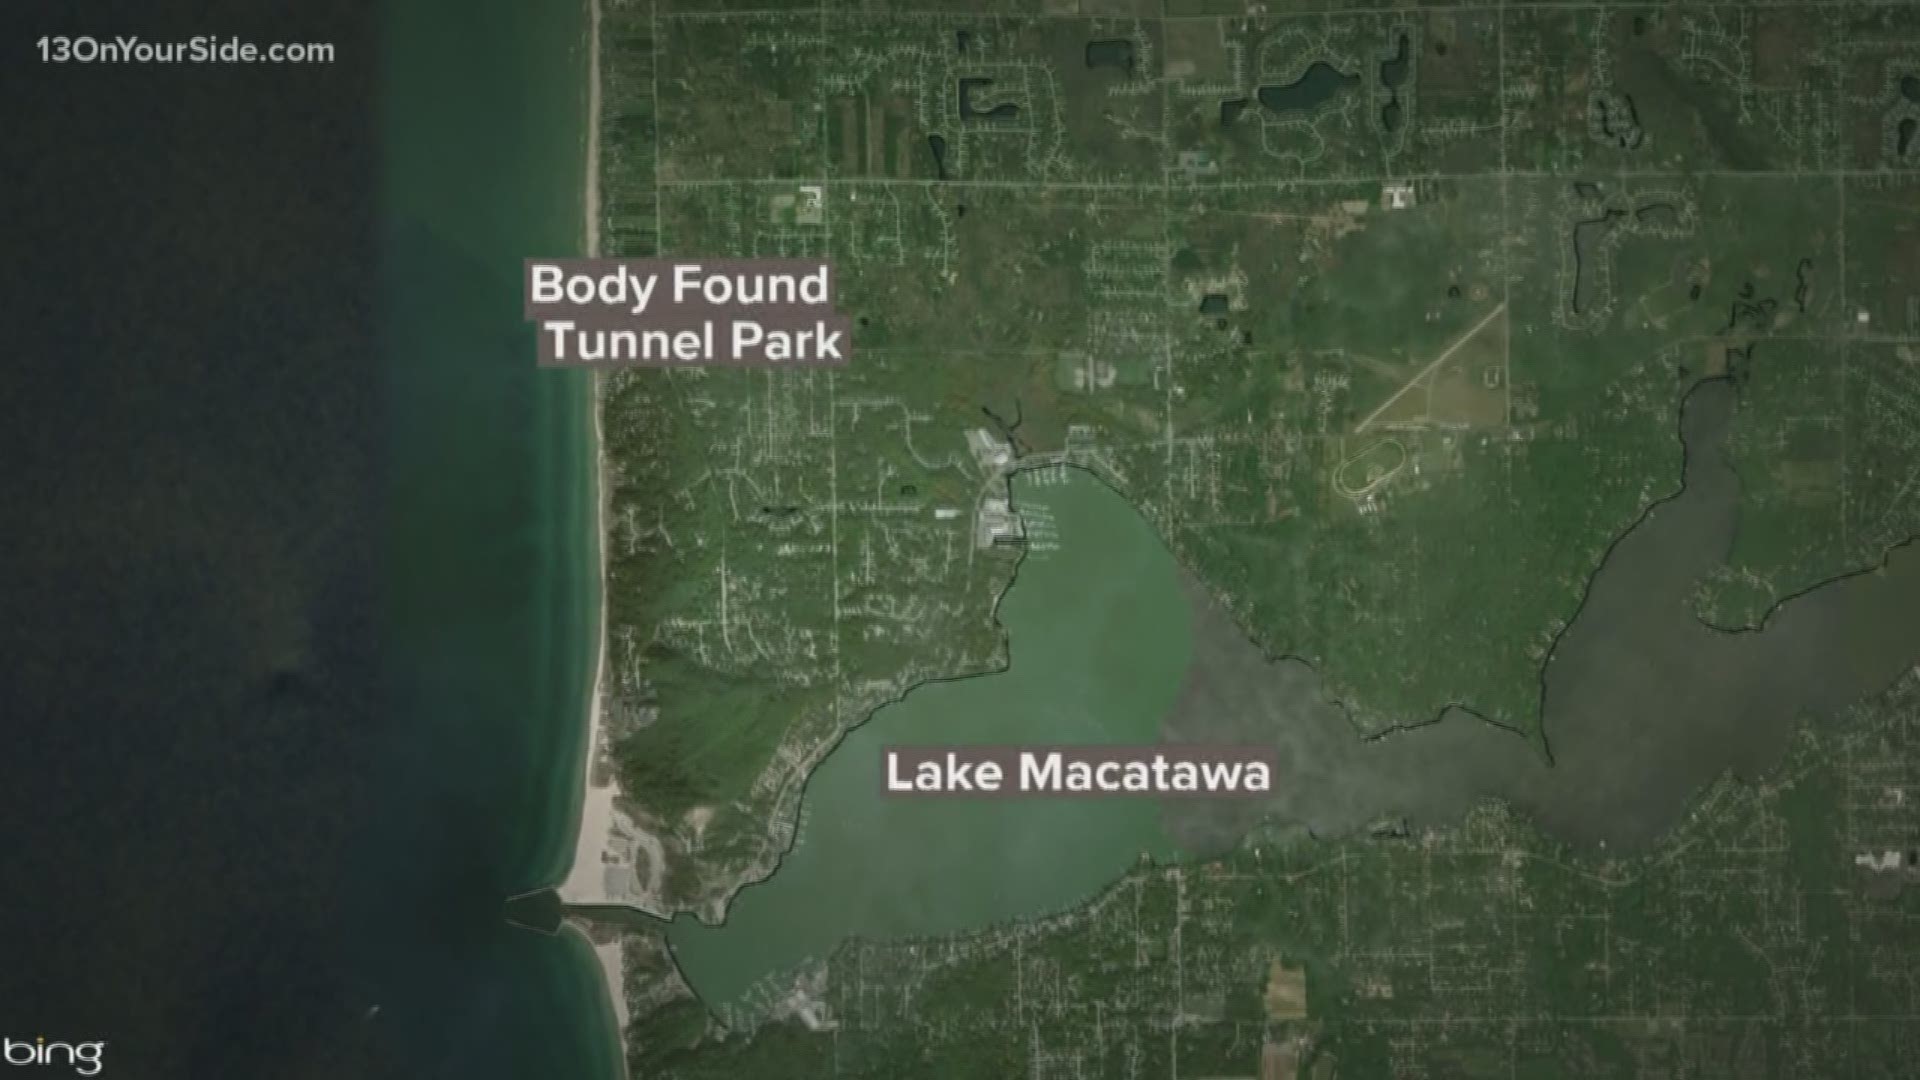 Deputies were called after someone saw the body floating in the water.